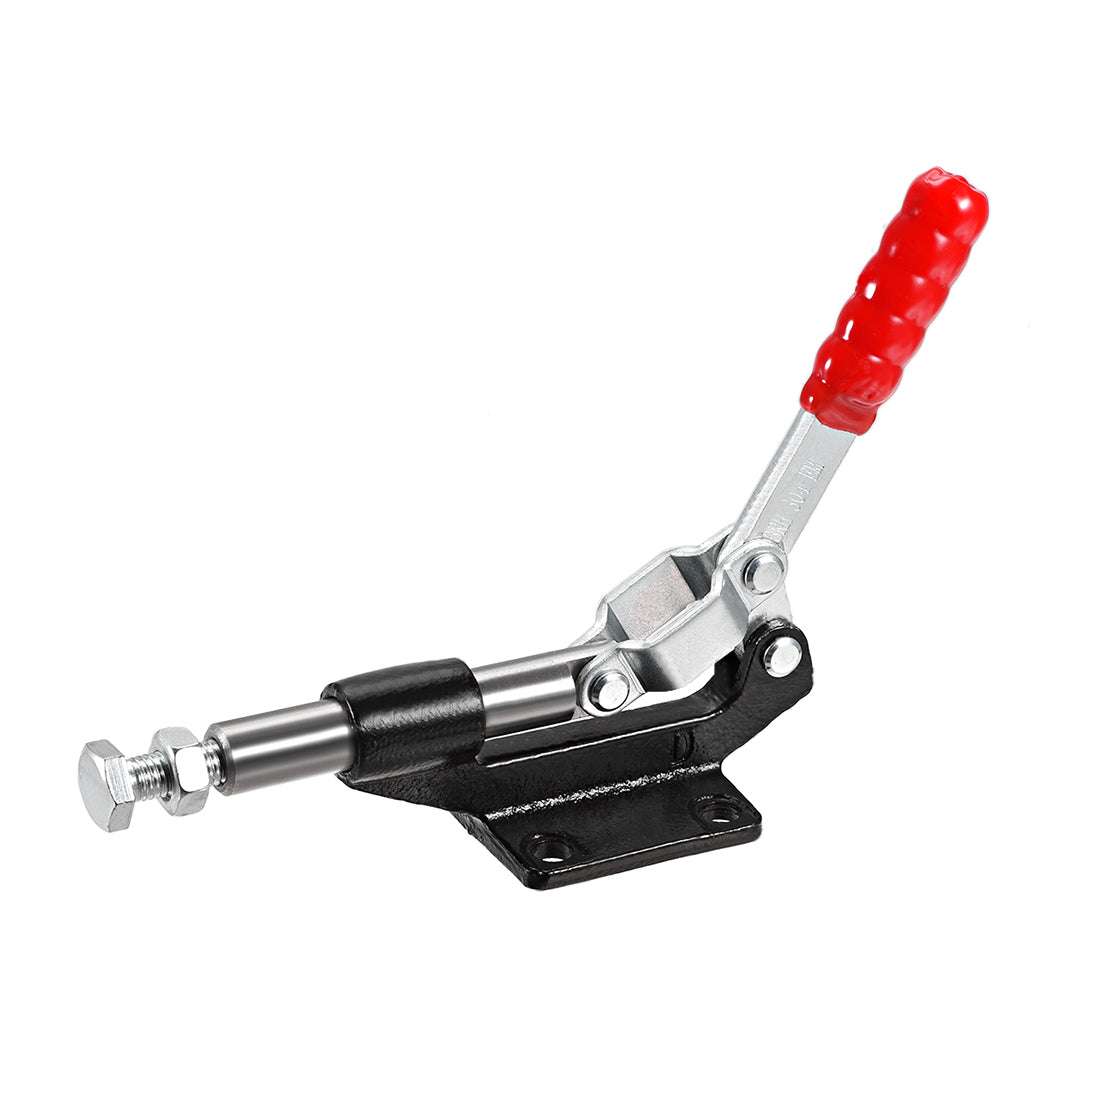 uxcell Uxcell Hand Tool Pull Push Action Toggle Clamp Quick-Release Clamp 850 lbs/386kg Holding Capacity 42mm Stroke